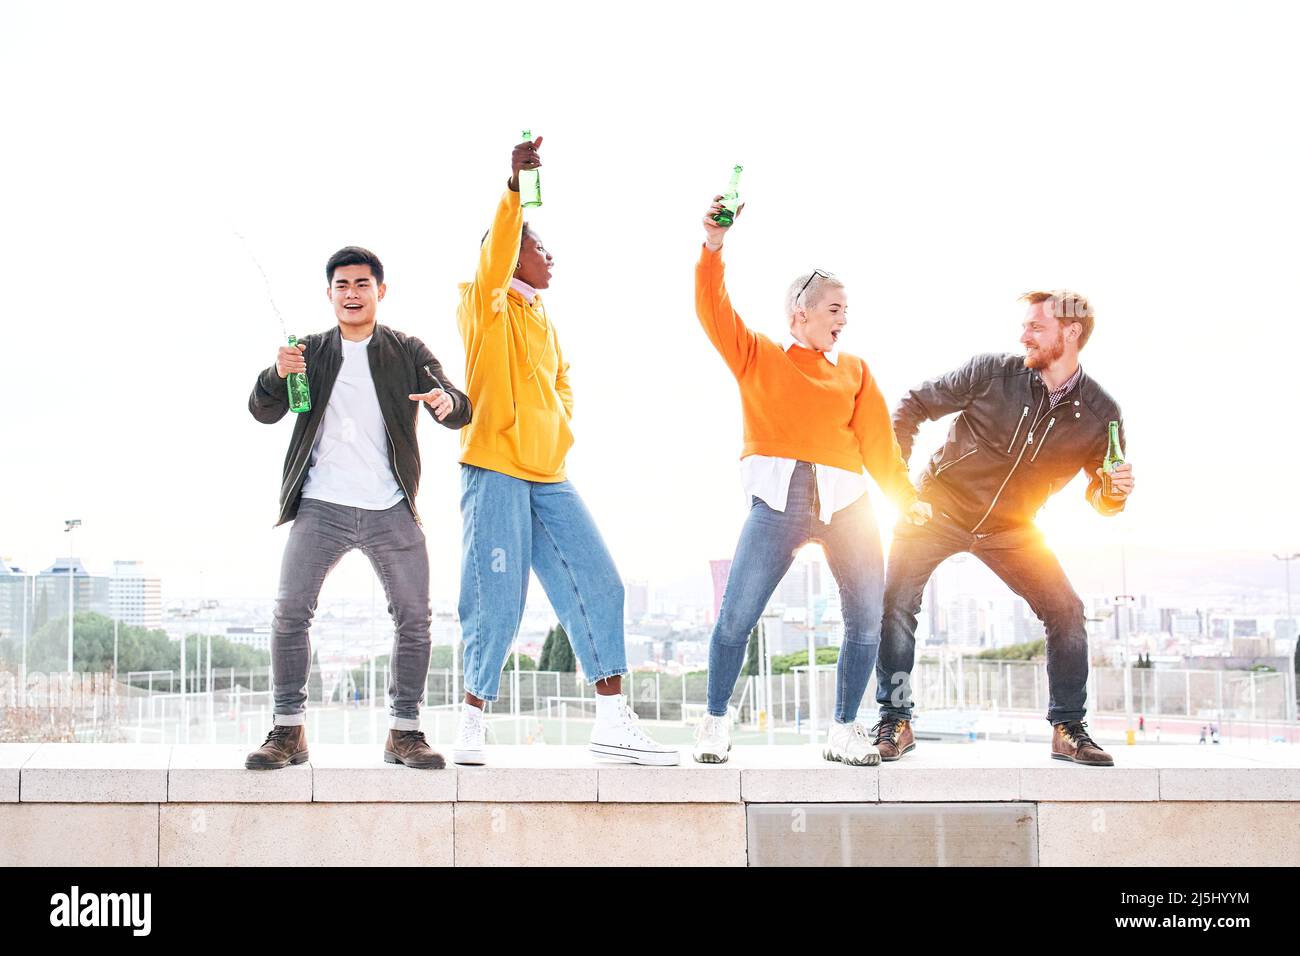 Group of diverse people dancing playfulness outdoors drinking beer and having fun. Happy friends celebrating together the success. Happiness and Stock Photo